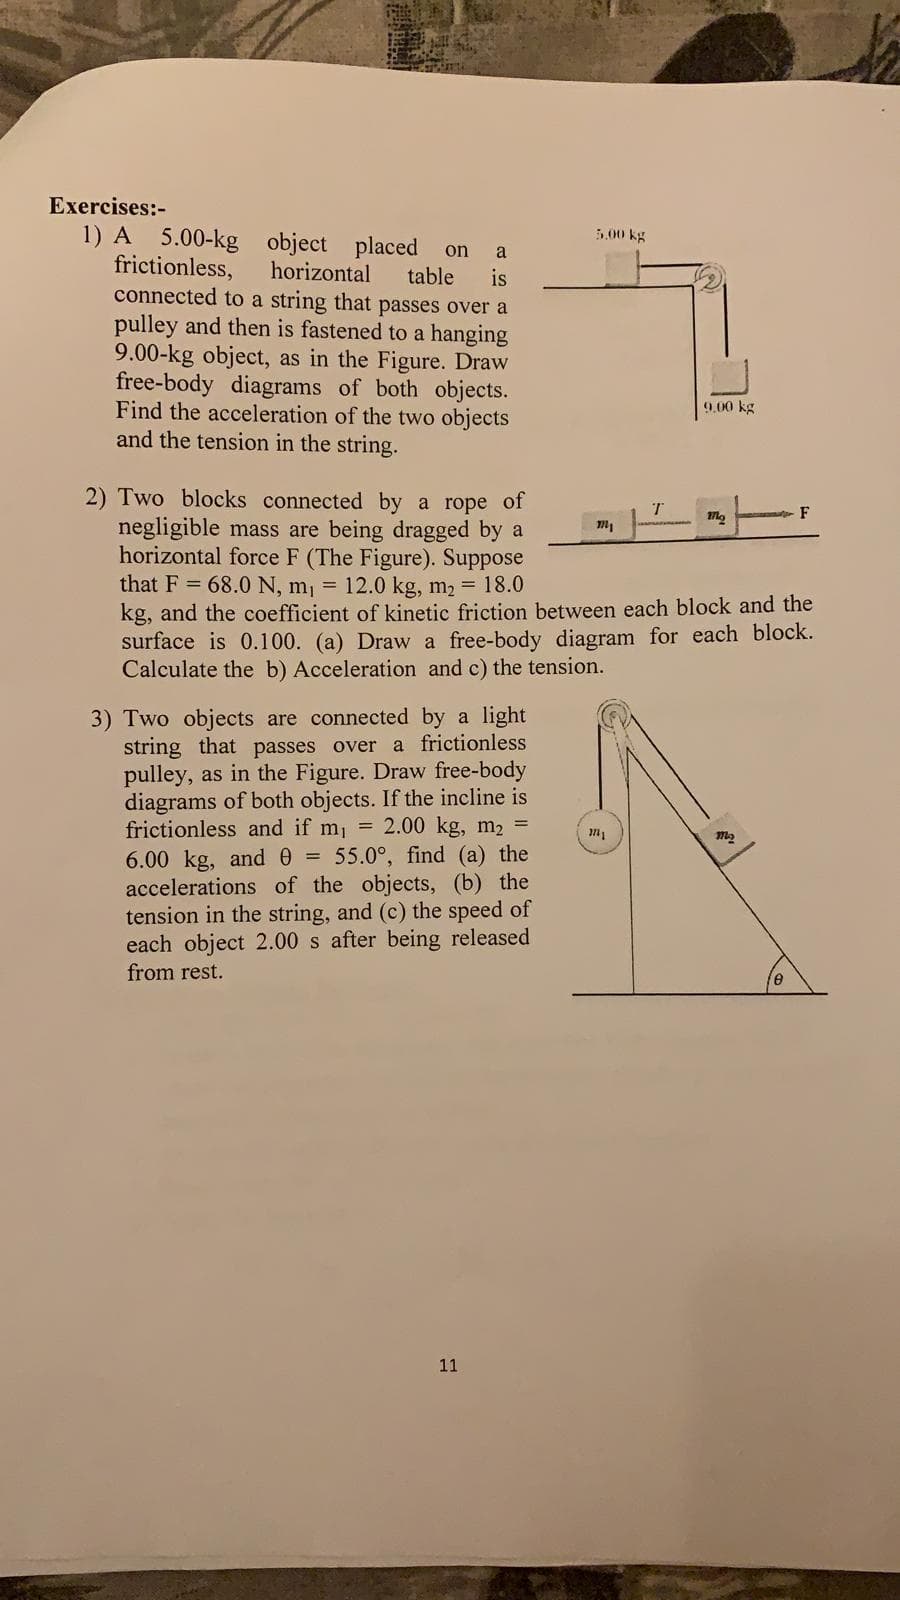 Exercises:
1) A 5.00-kg
frictionless,
connected to a string that passes over a
pulley and then is fastened to a hanging
9.00-kg object, as in the Figure. Draw
free-body diagrams of both objects.
Find the acceleration of the two objects
and the tension in the string.
5.00 kg
object placed
horizontal
on
a
table
is
9.00 kg
2) Two blocks connected by a rope of
negligible mass are being dragged by a
horizontal force F (The Figure). Suppose
that F 68.0 N, mi 12.0 kg, m2 18.0
kg, and the coefficient of kinetic friction between each block and the
surface is 0.100. (a) Draw a free-body diagram for each block.
Calculate the b) Acceleration and c) the tension.
T
F
2mg
3) Two objects are connected by a light
string that passes over a frictionless
pulley, as in the Figure. Draw free-body
diagrams of both objects. If the incline is
frictionless and if mi 2.00 kg, m2
6.00 kg, and 0 55.0°, find (a) the
accelerations of the objects, (b) the
tension in the string, and (c) the speed of
each object 2.00 s after being released
from rest.
n
е
11
